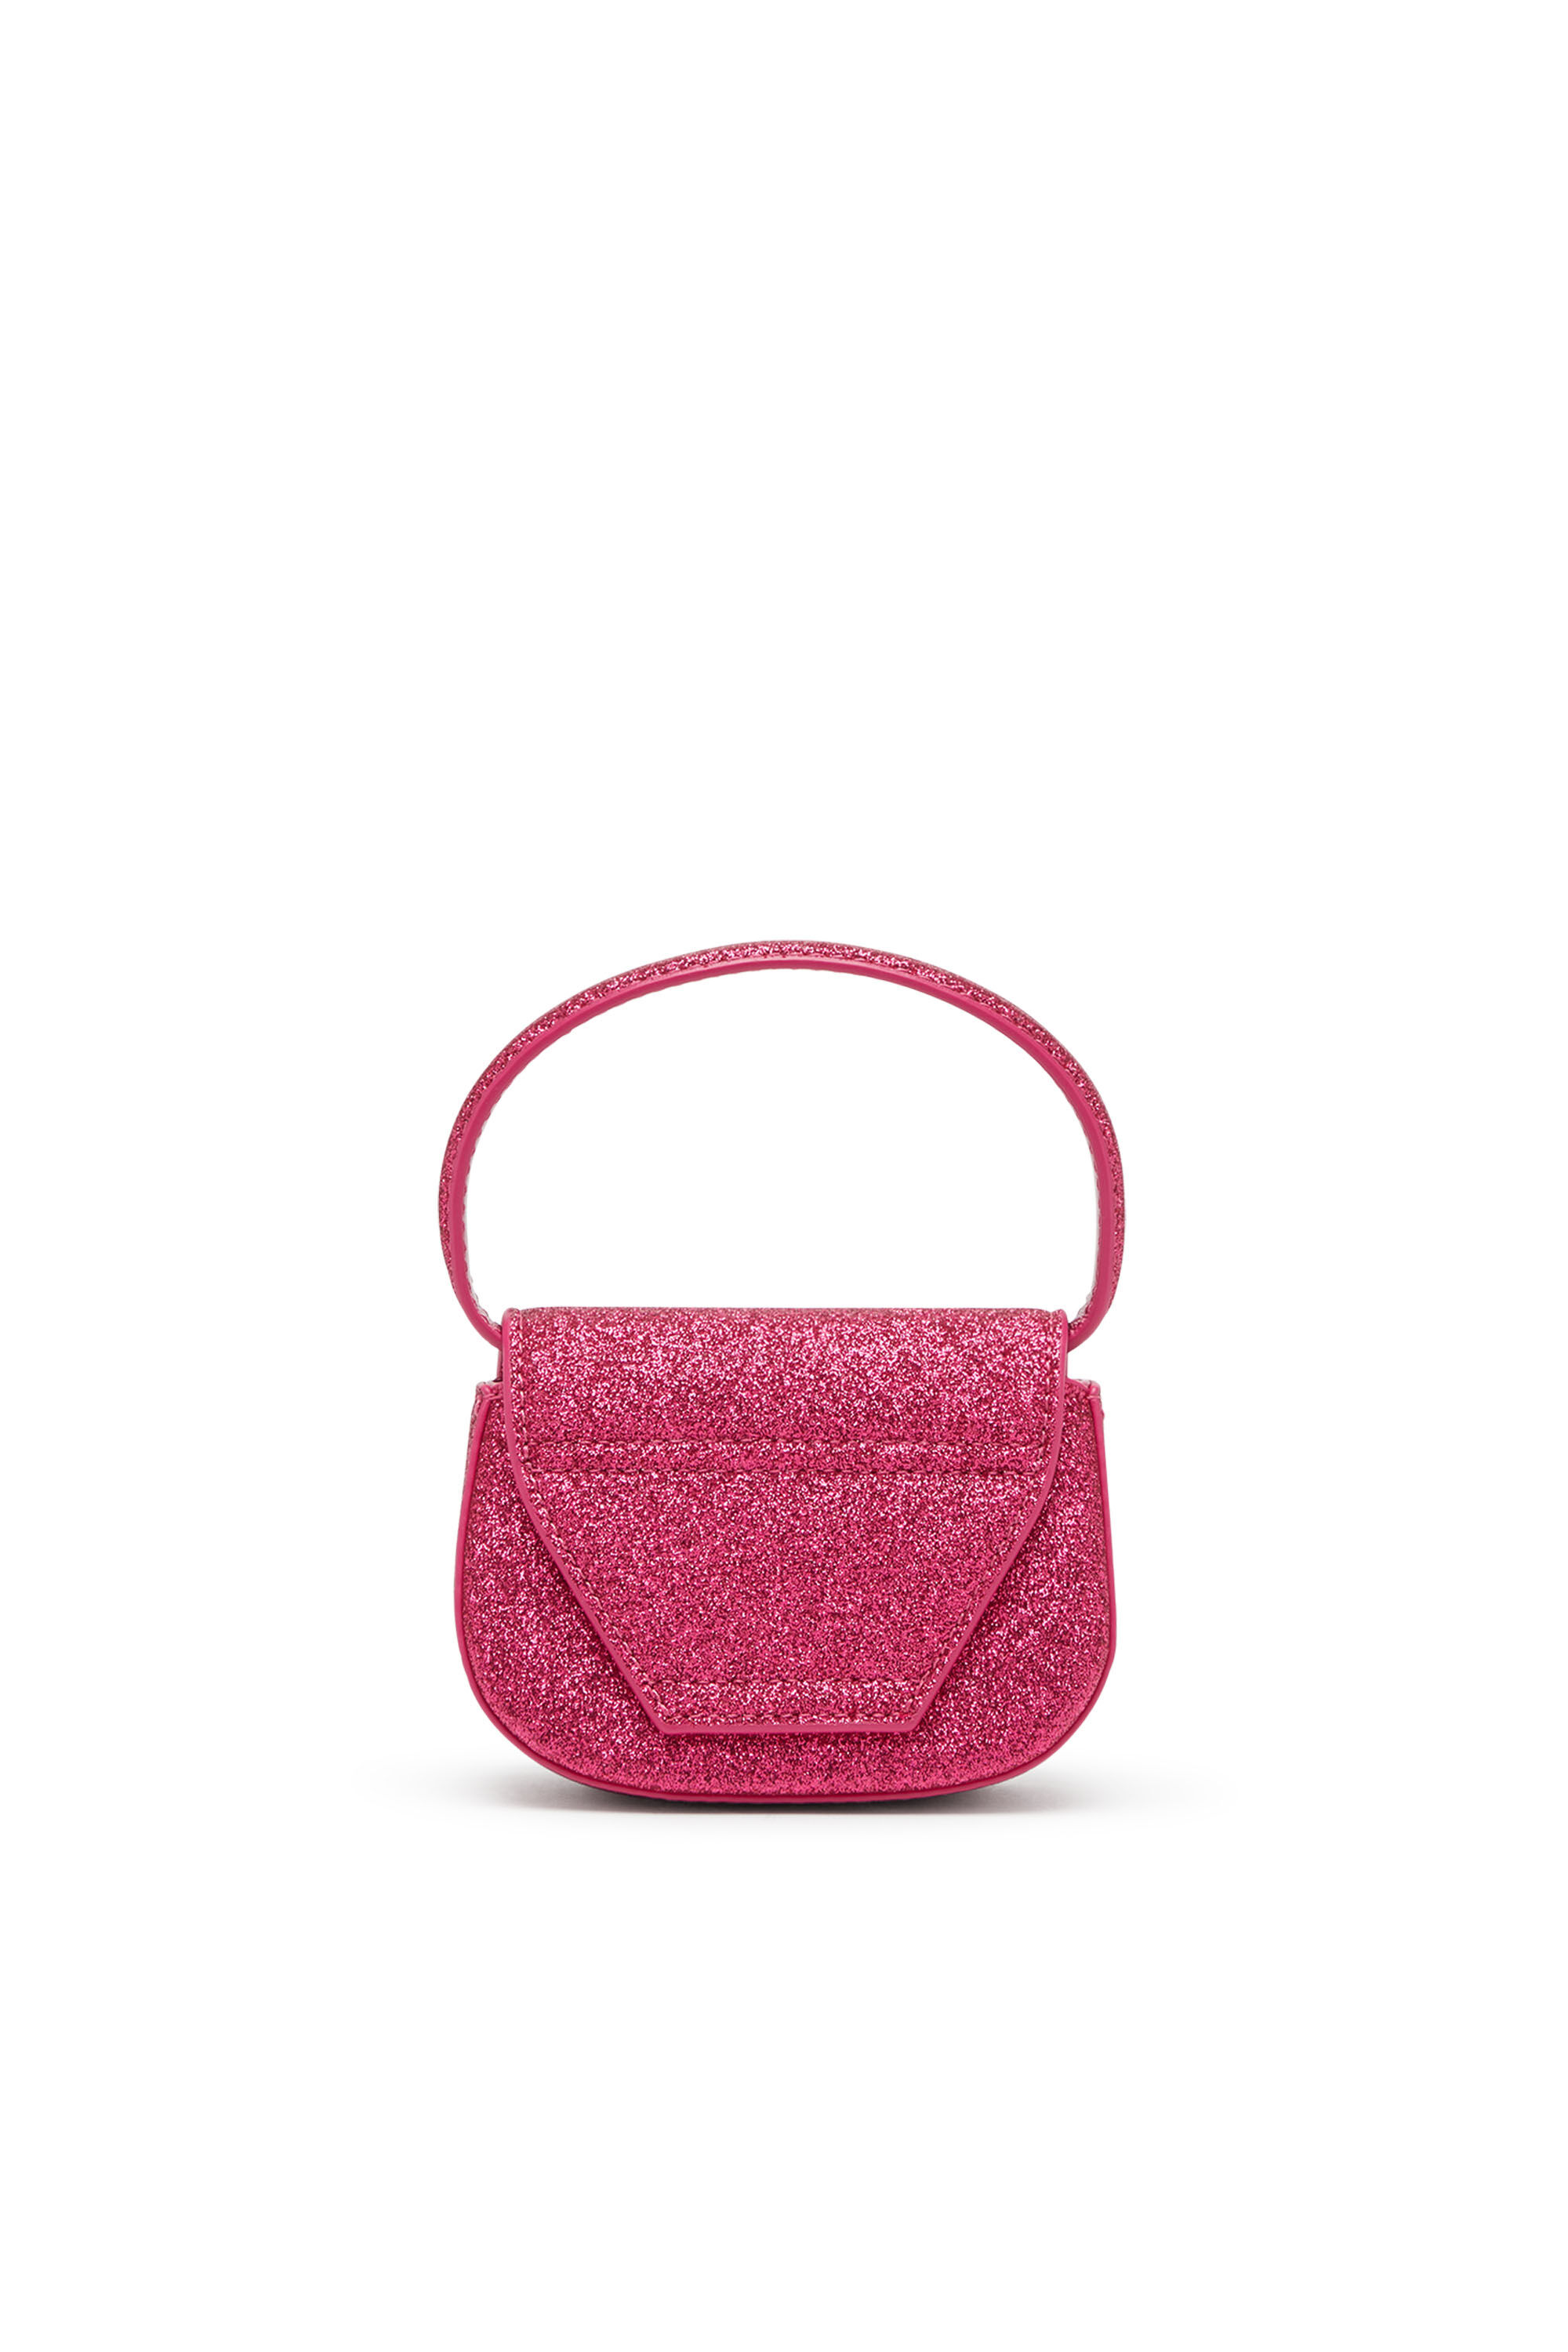 Diesel - 1DR XS, Woman 1DR XS-Iconic mini bag in glitter fabric in Pink - Image 3